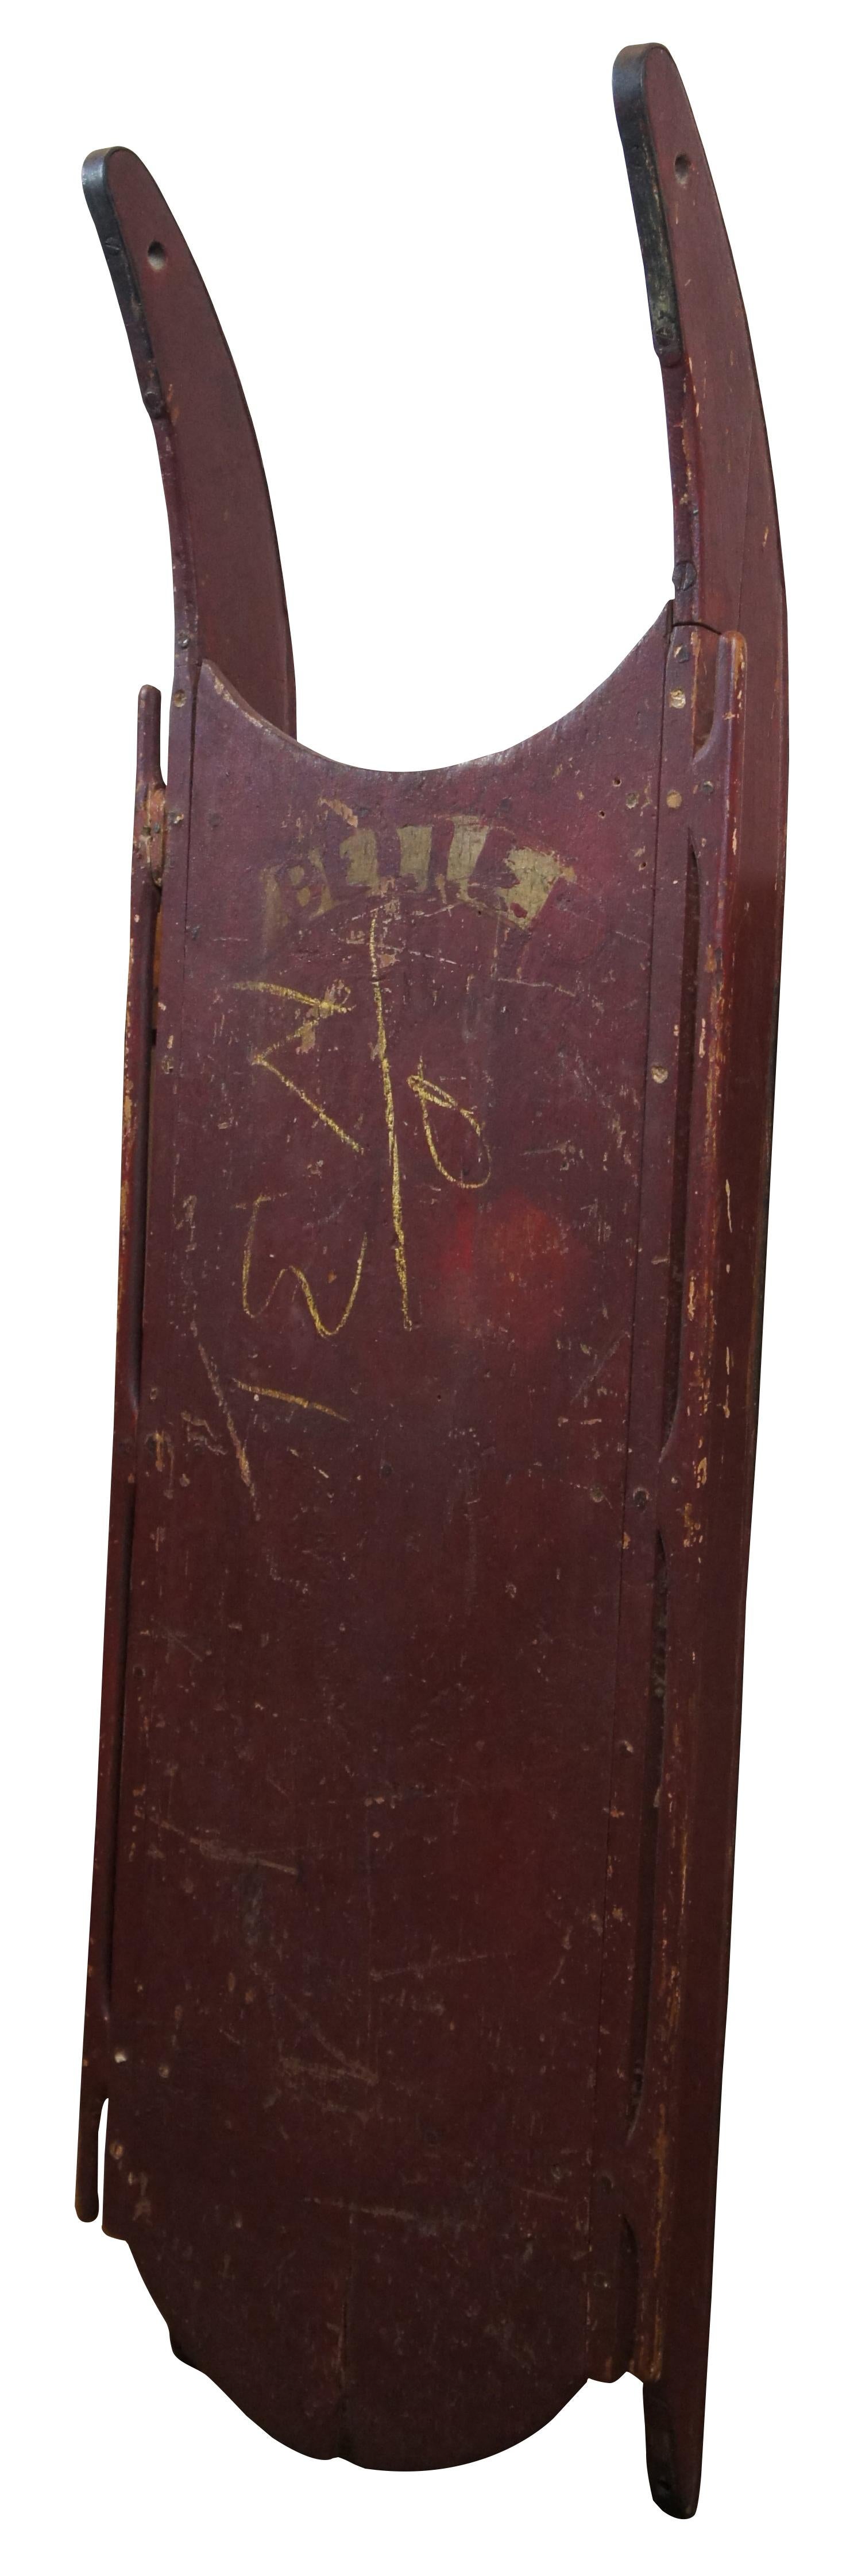 Antique Victorian wooden children’s sled with iron wrapped runners, painted dark red with the word “Belle” picked out in gold.